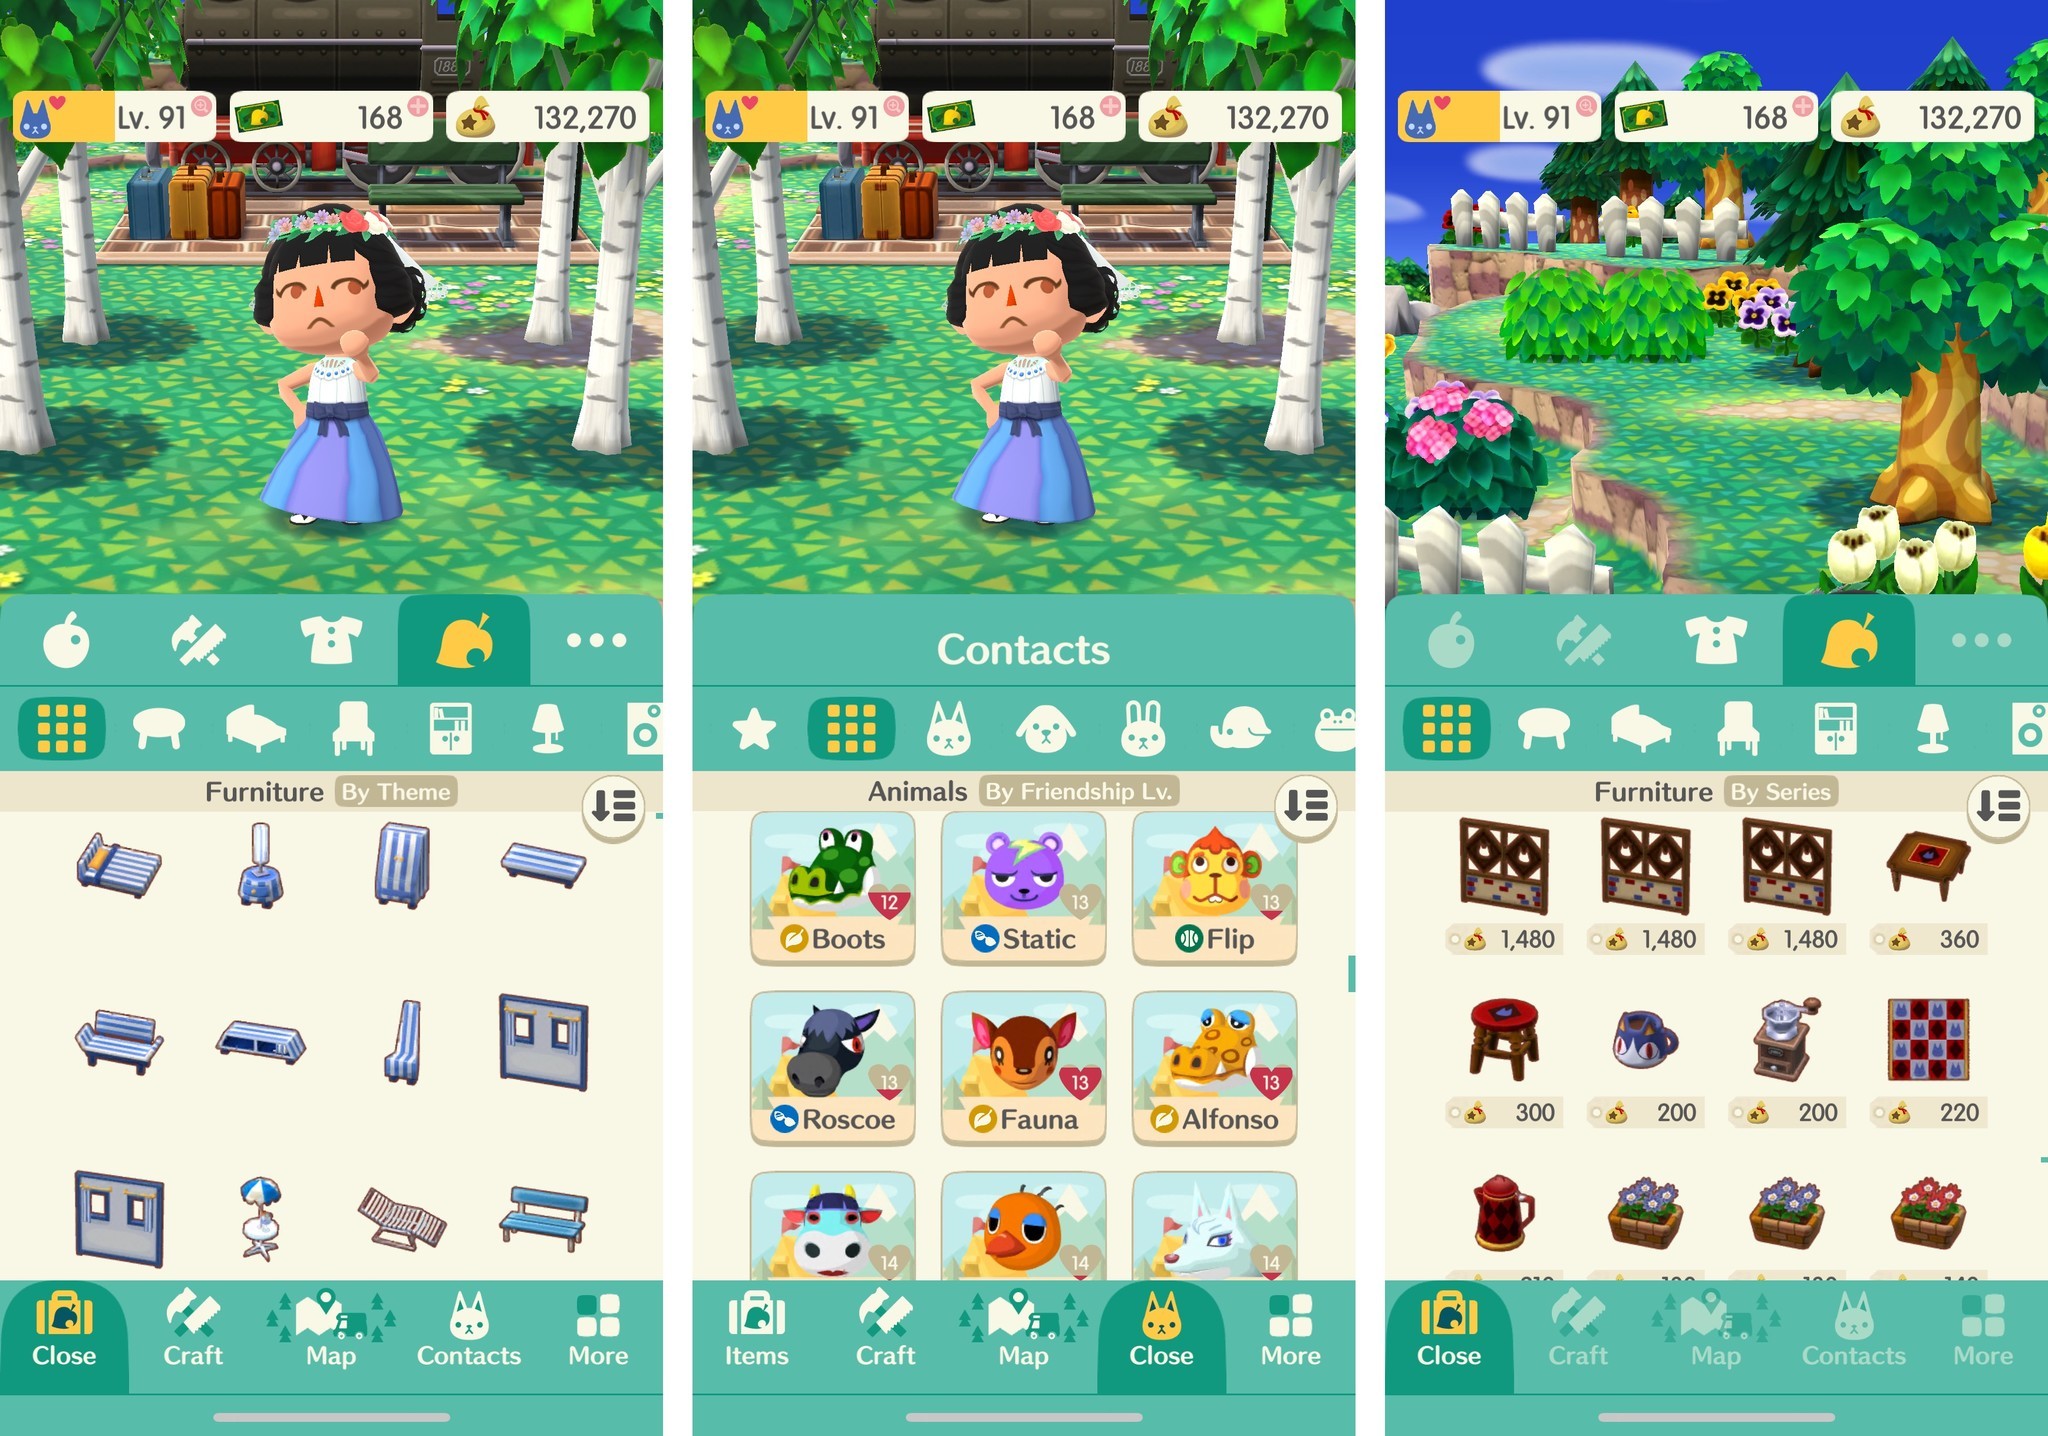 New sorting features in Animal Crossing Pocket Camp